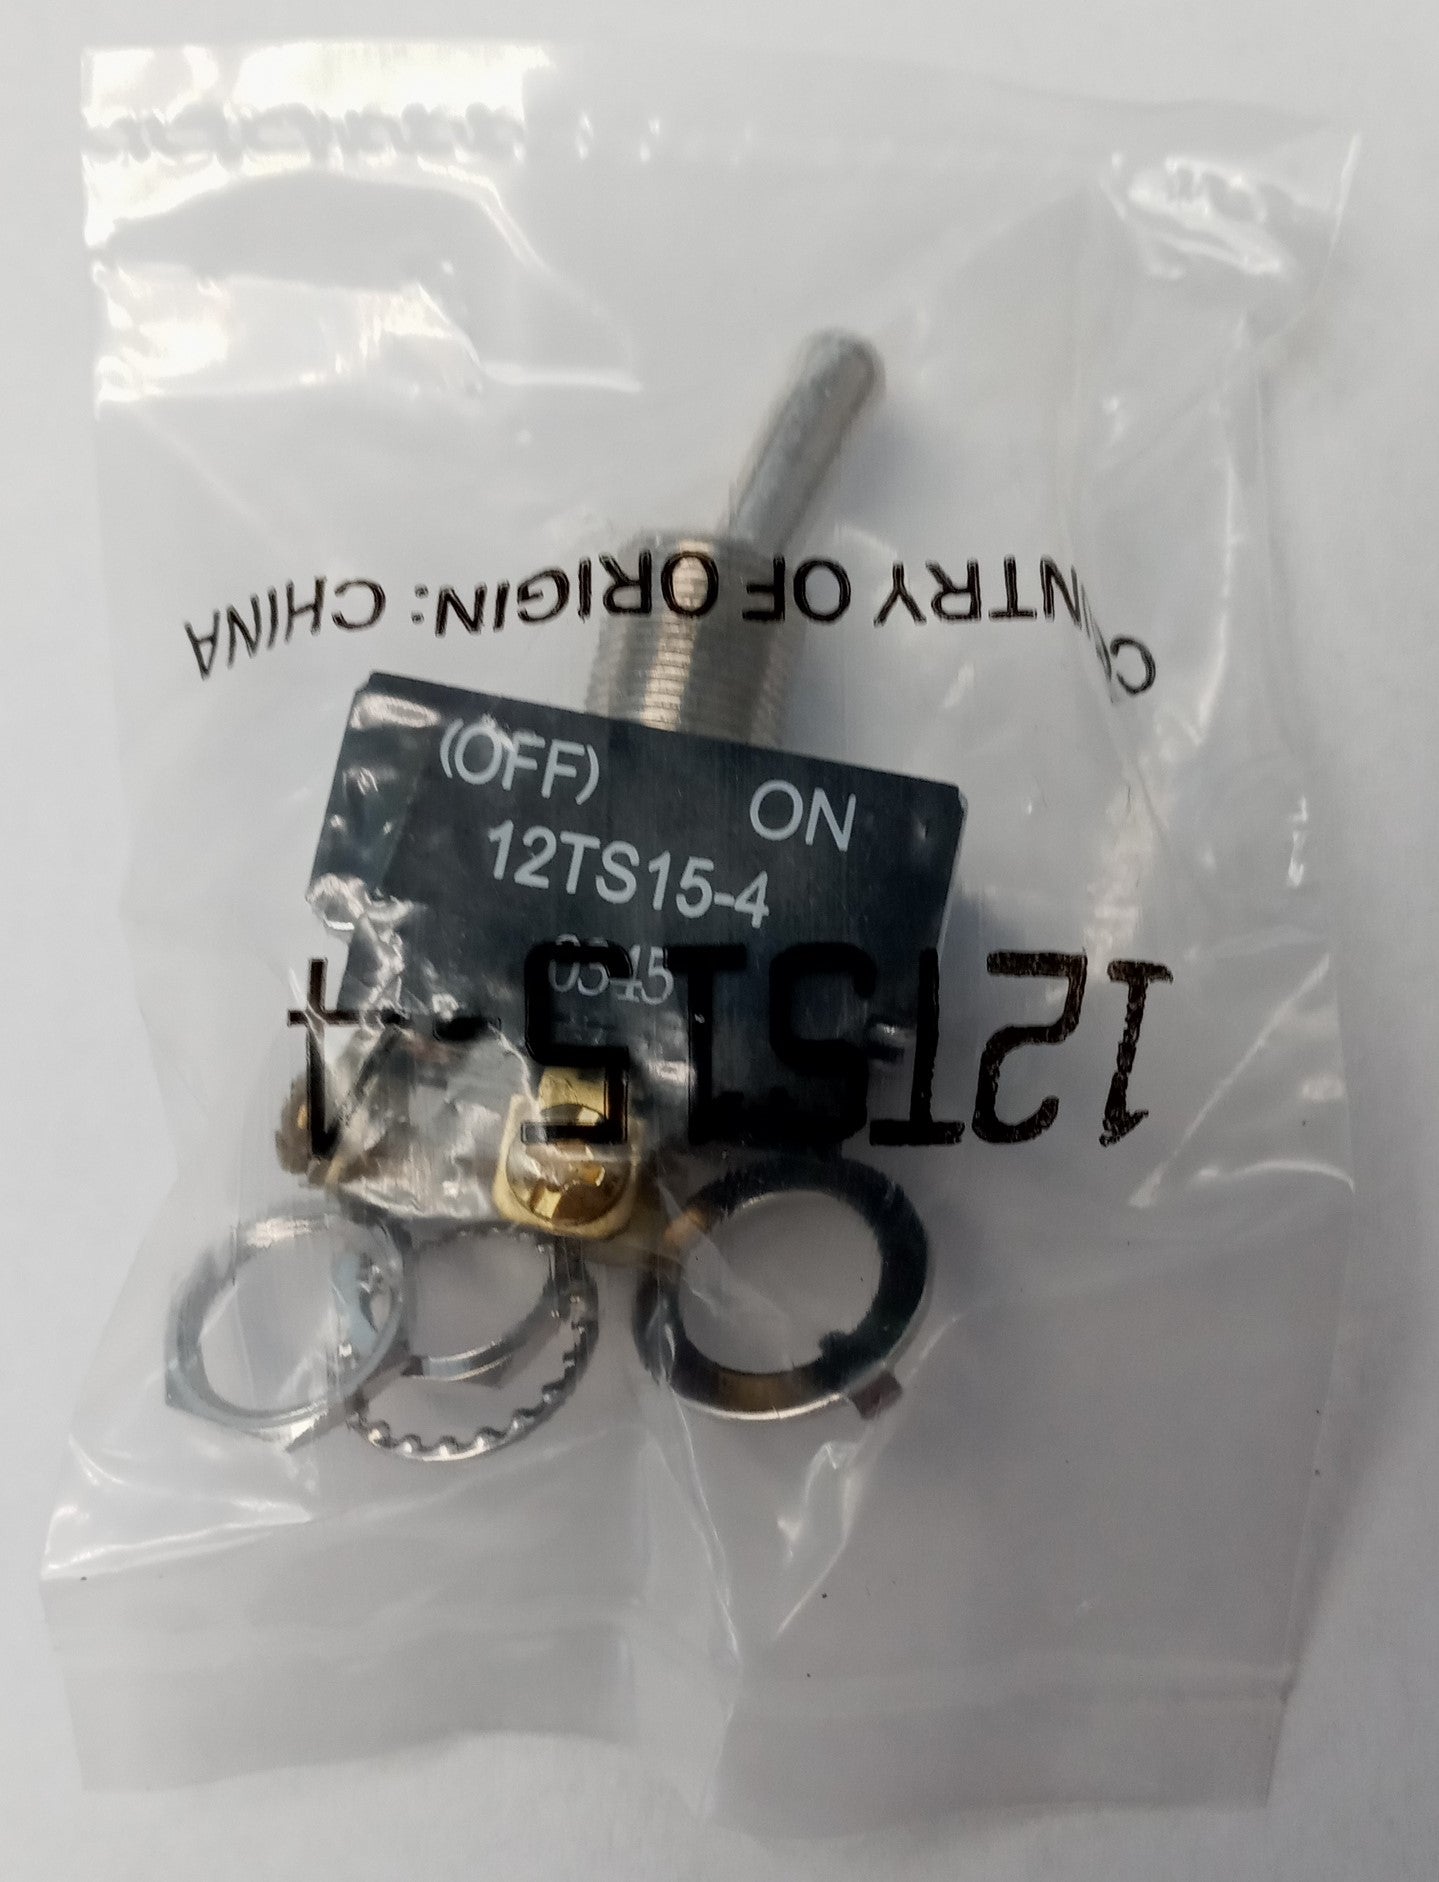 Honeywell 12TS15-4 Toggle Switch (OFF)-ON 10a 277 20A 125 1 1/2 HP 125-250